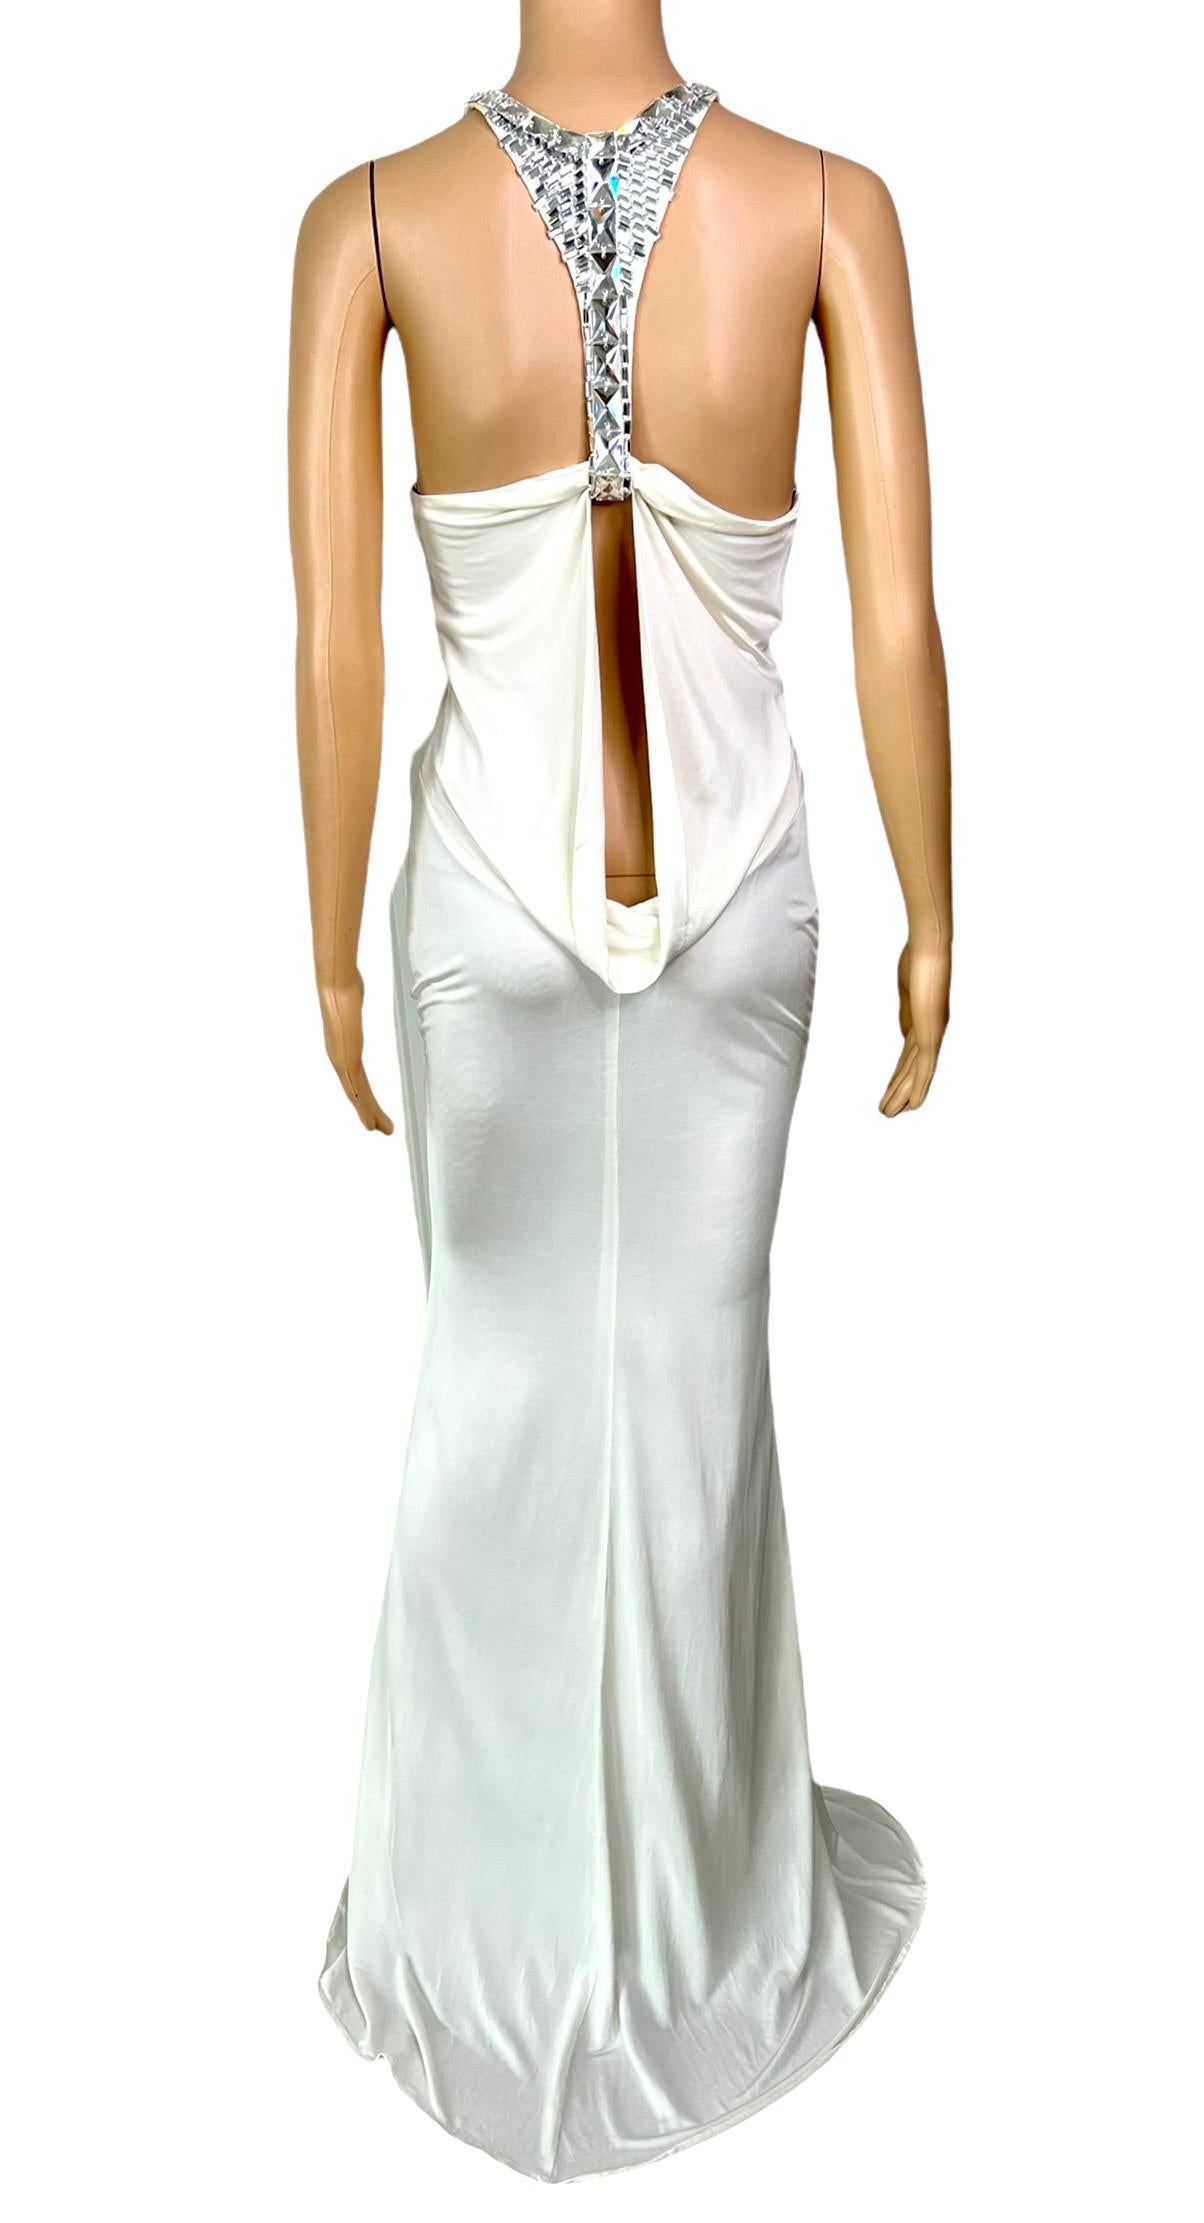 Tom Ford for Gucci F/W 2004 Embellished Plunging Cutout Ivory Evening Dress Gown In Excellent Condition For Sale In Naples, FL